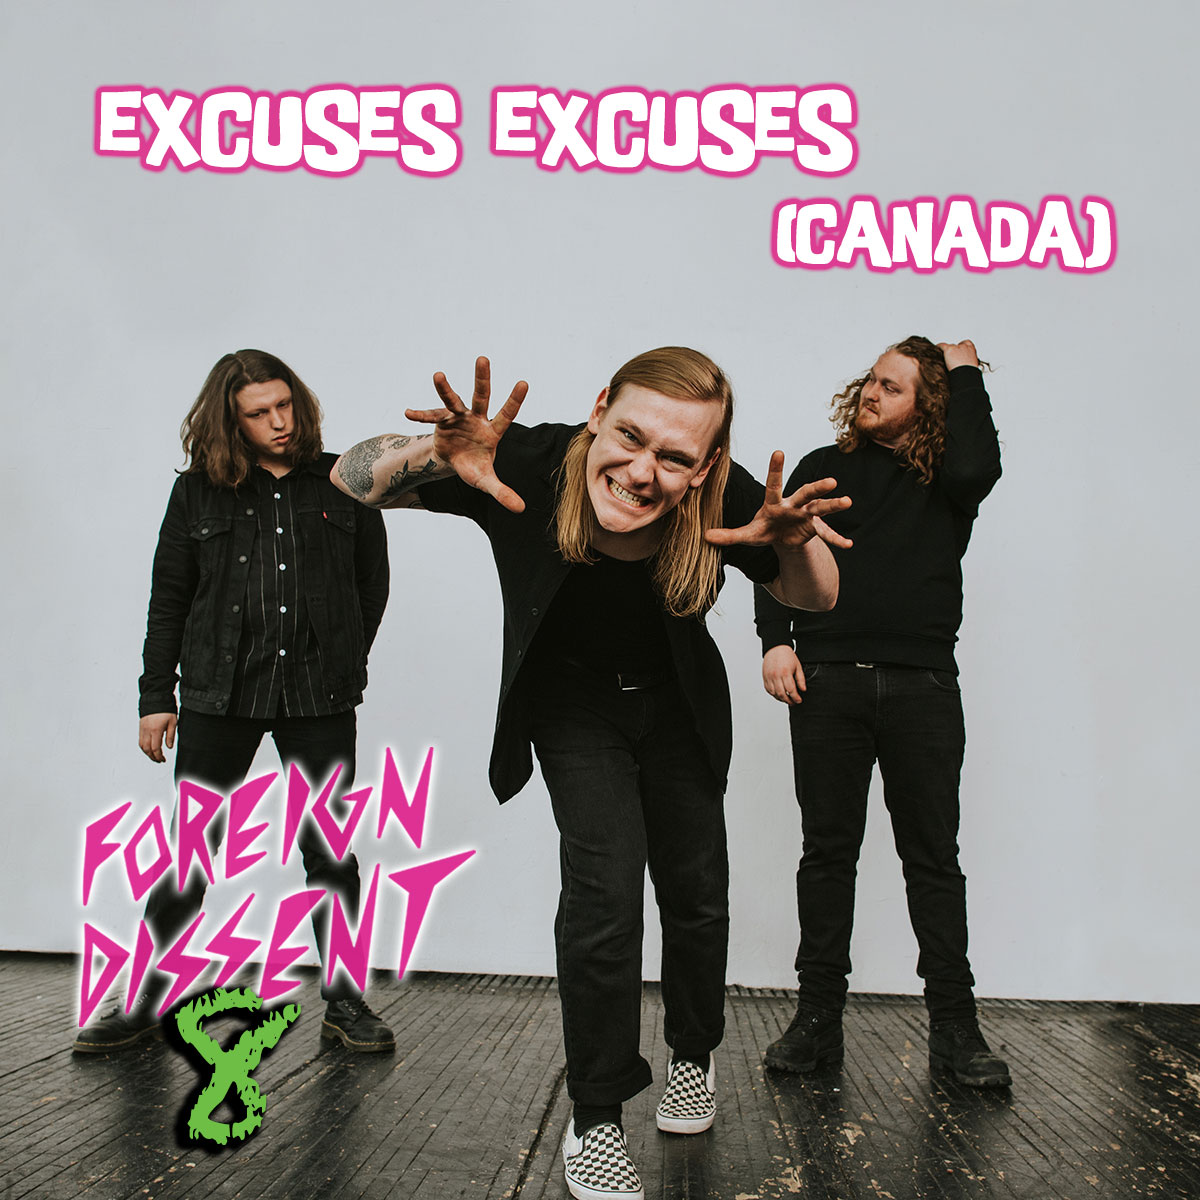 Excuses Excuses from Canada - Foreign Dissent 8